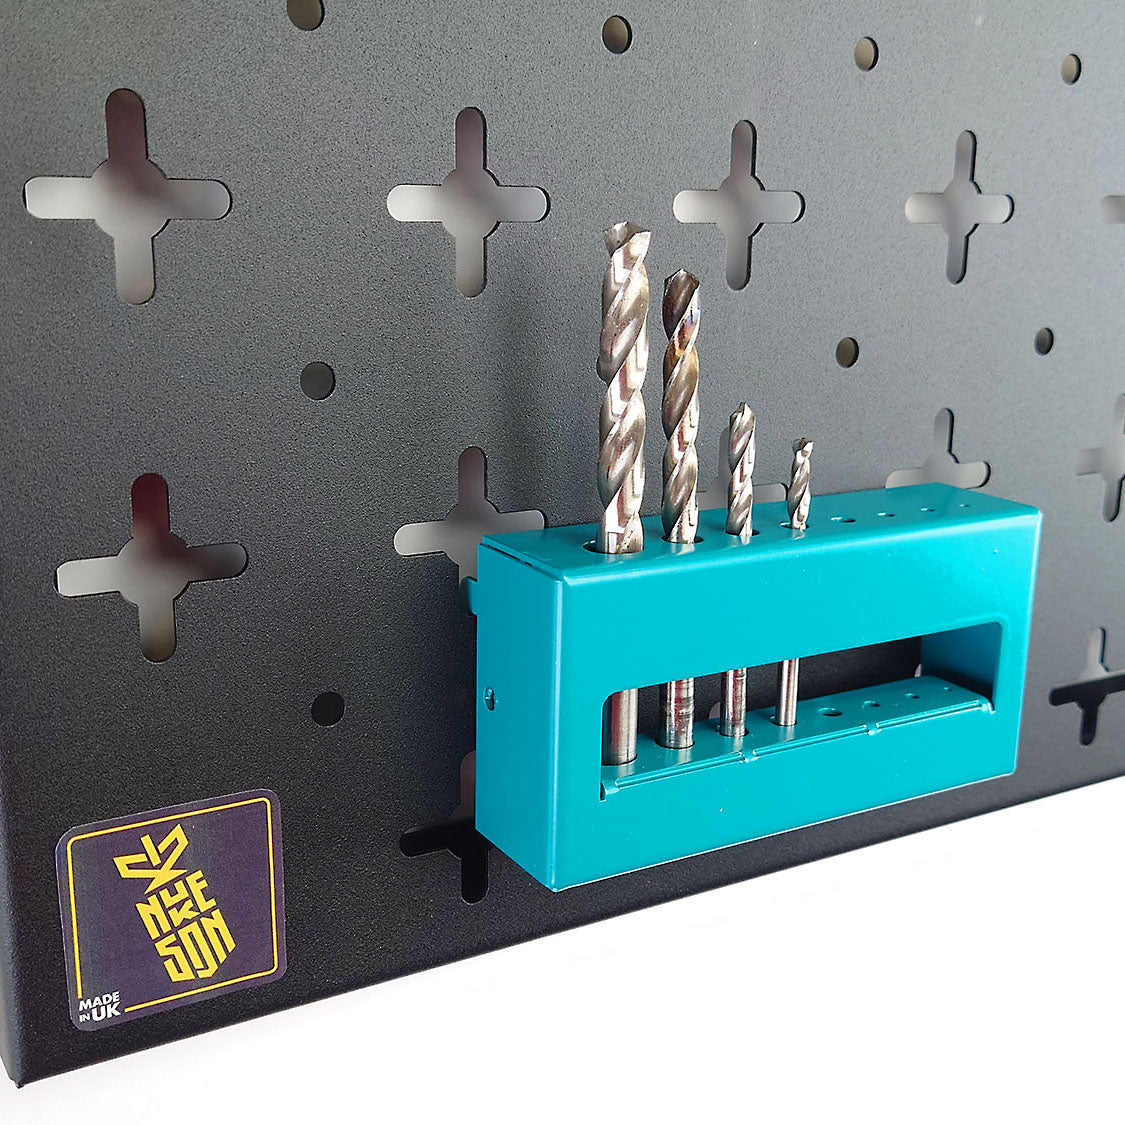 Nukeson Tool Wall - Drill Bit Holder Attachment - Indoor Outdoors